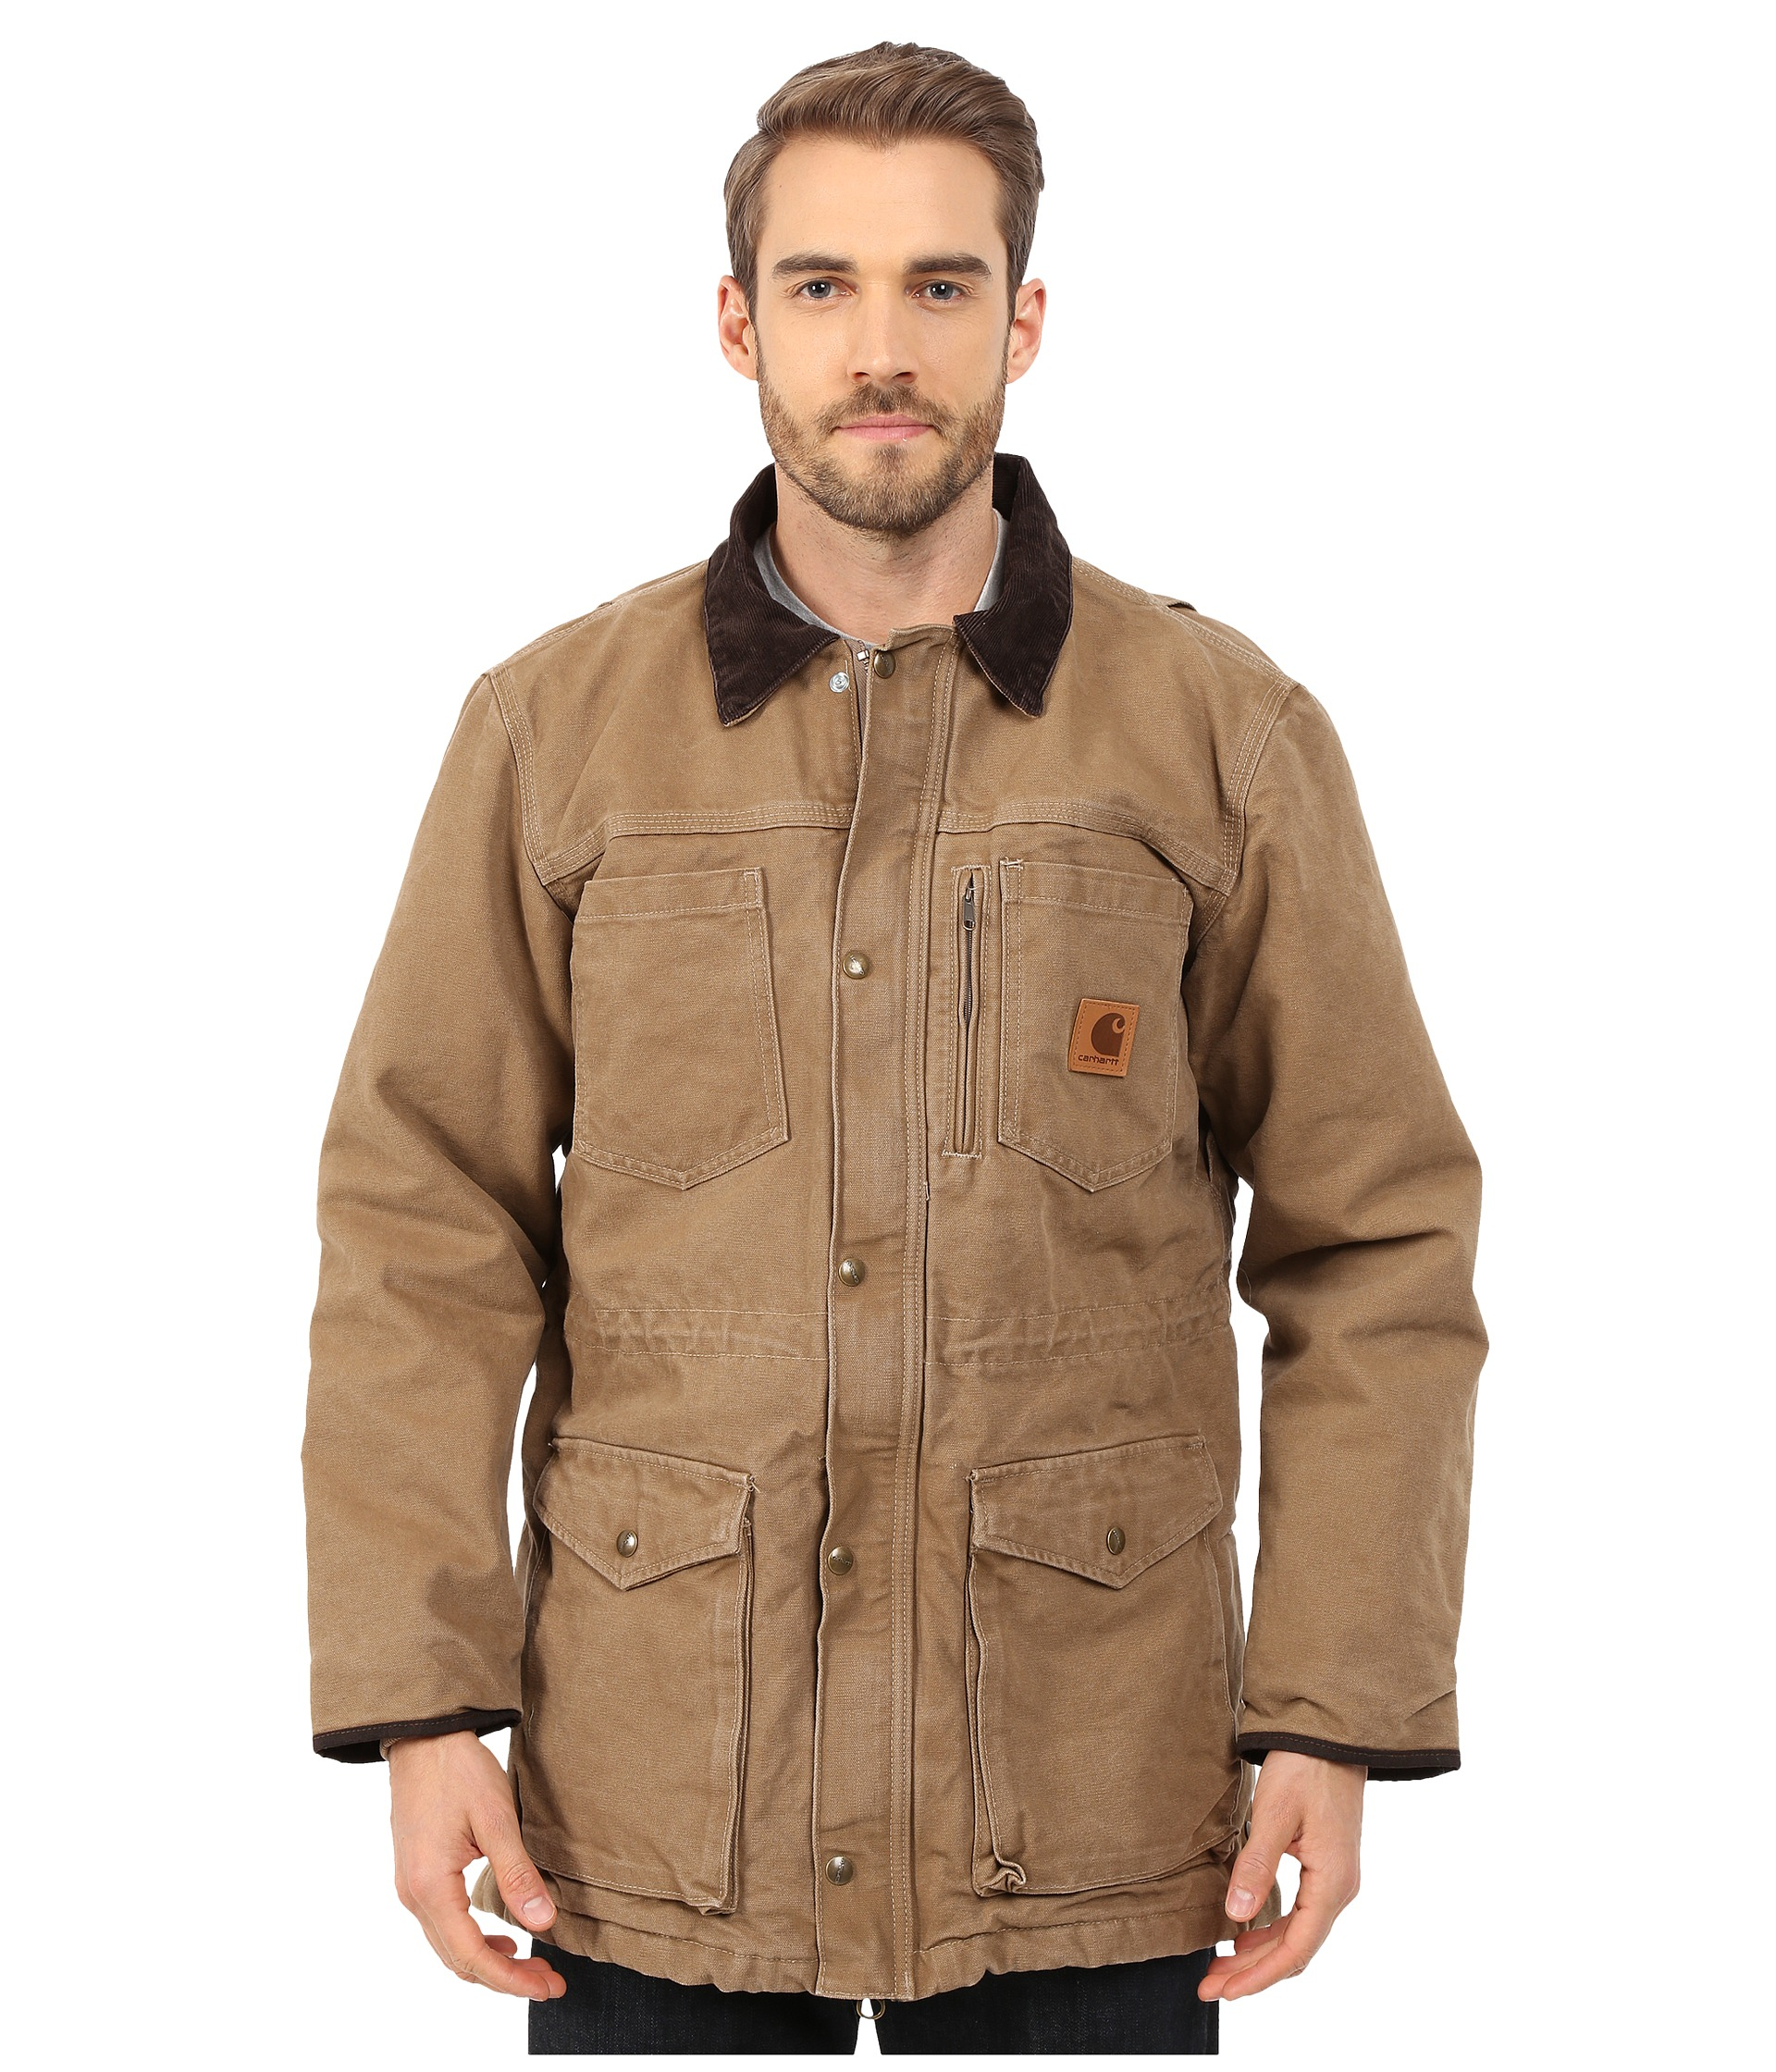 Carhartt Cotton Big & Tall Canyon Coat in Brown for Men - Lyst